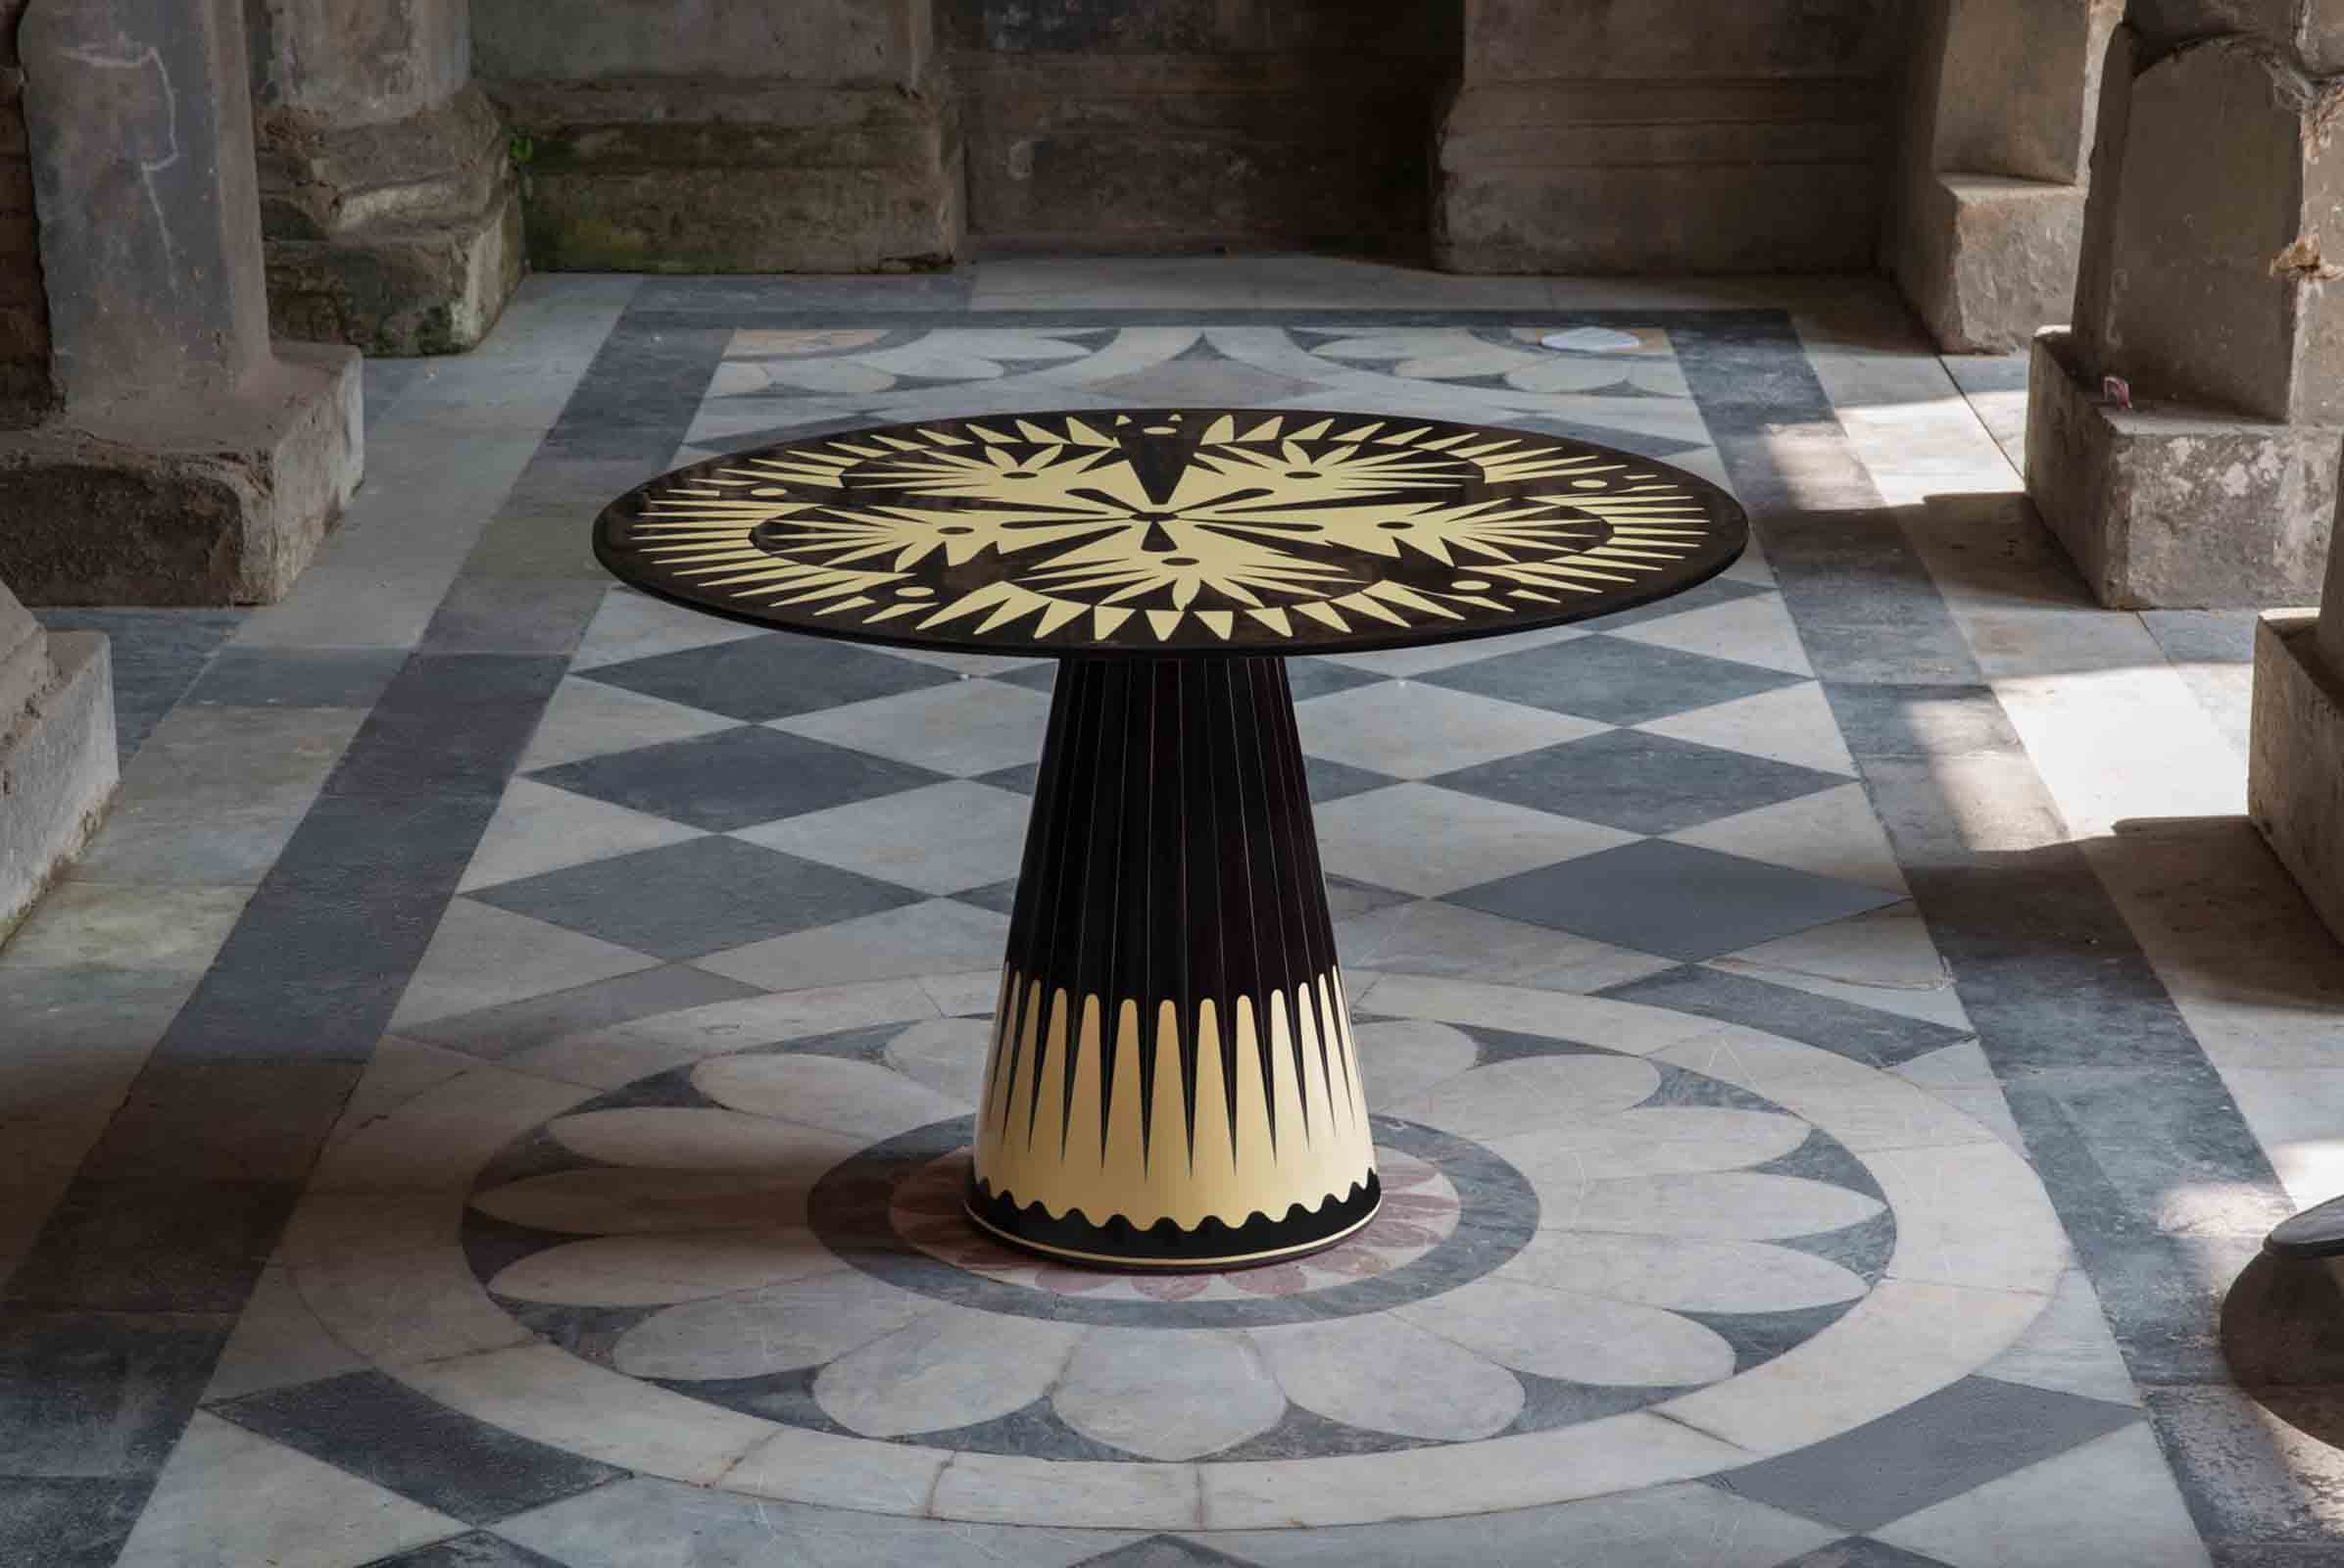 The ‘Metropolis’ table, designed by Italian Matteo Cibic for Indian company Scarlet Splendour